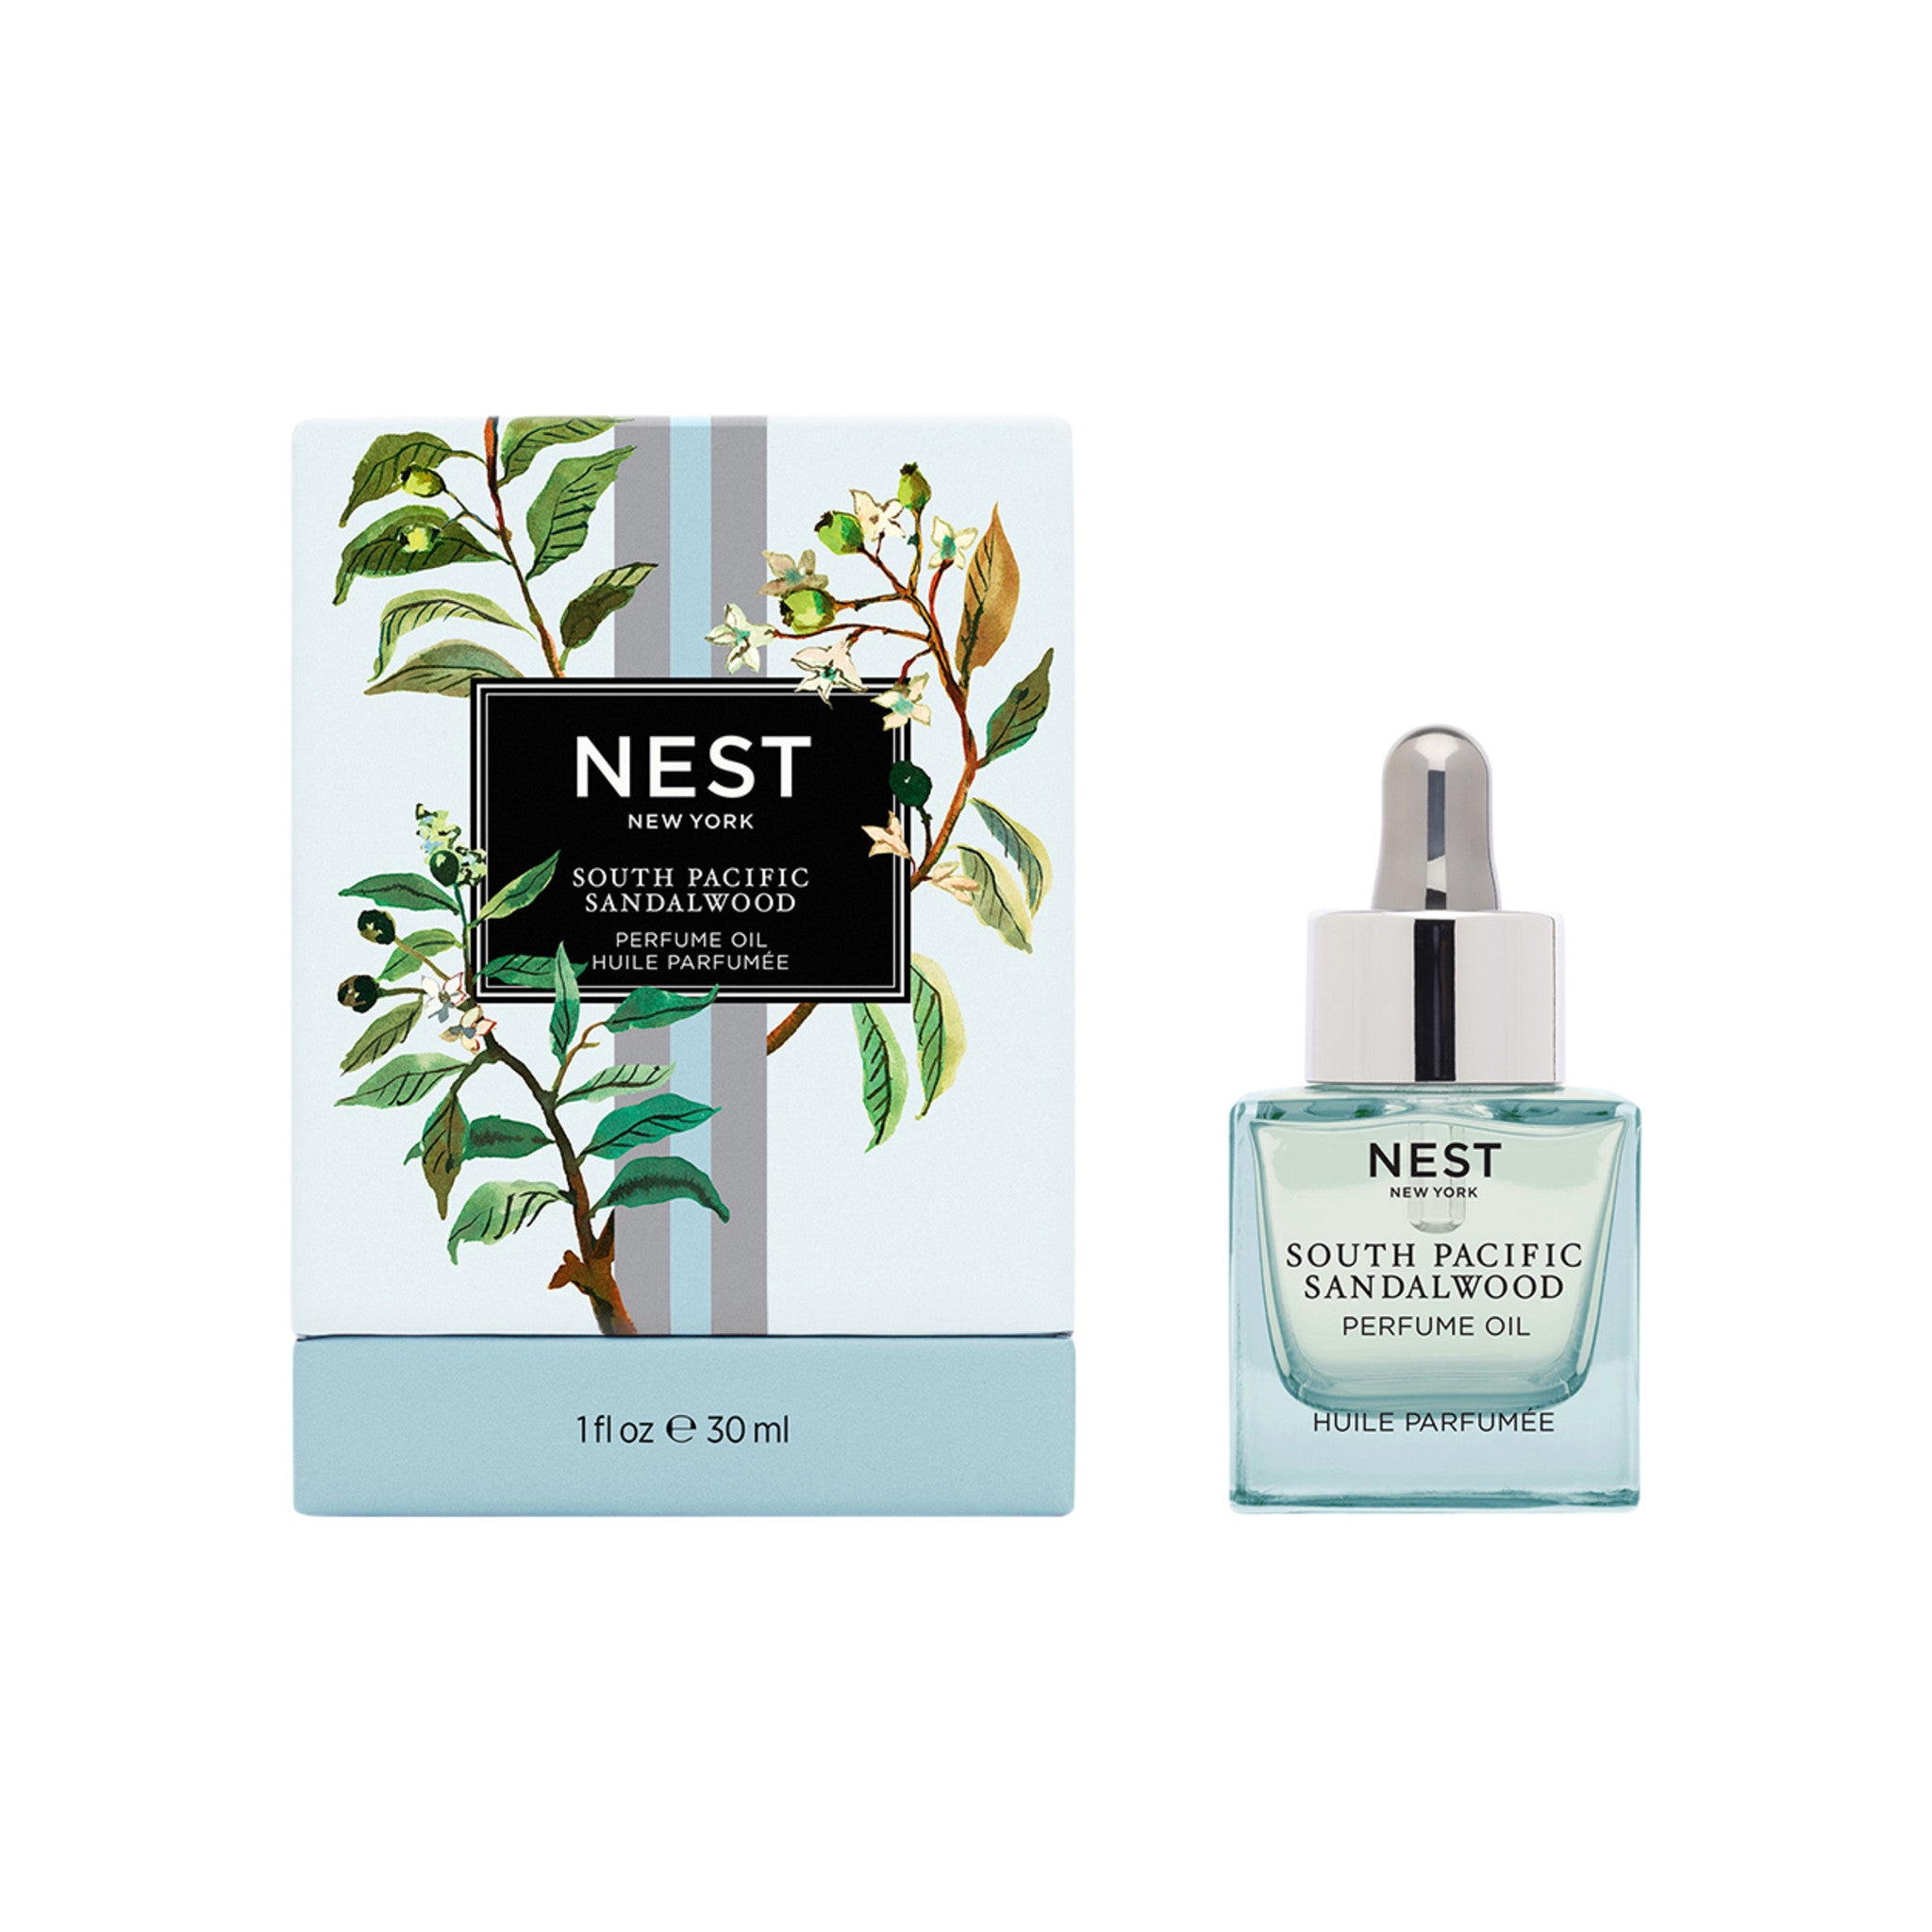 Nest South Pacific Sandalwood Perfume Oil Size variant: 30 ml main image.